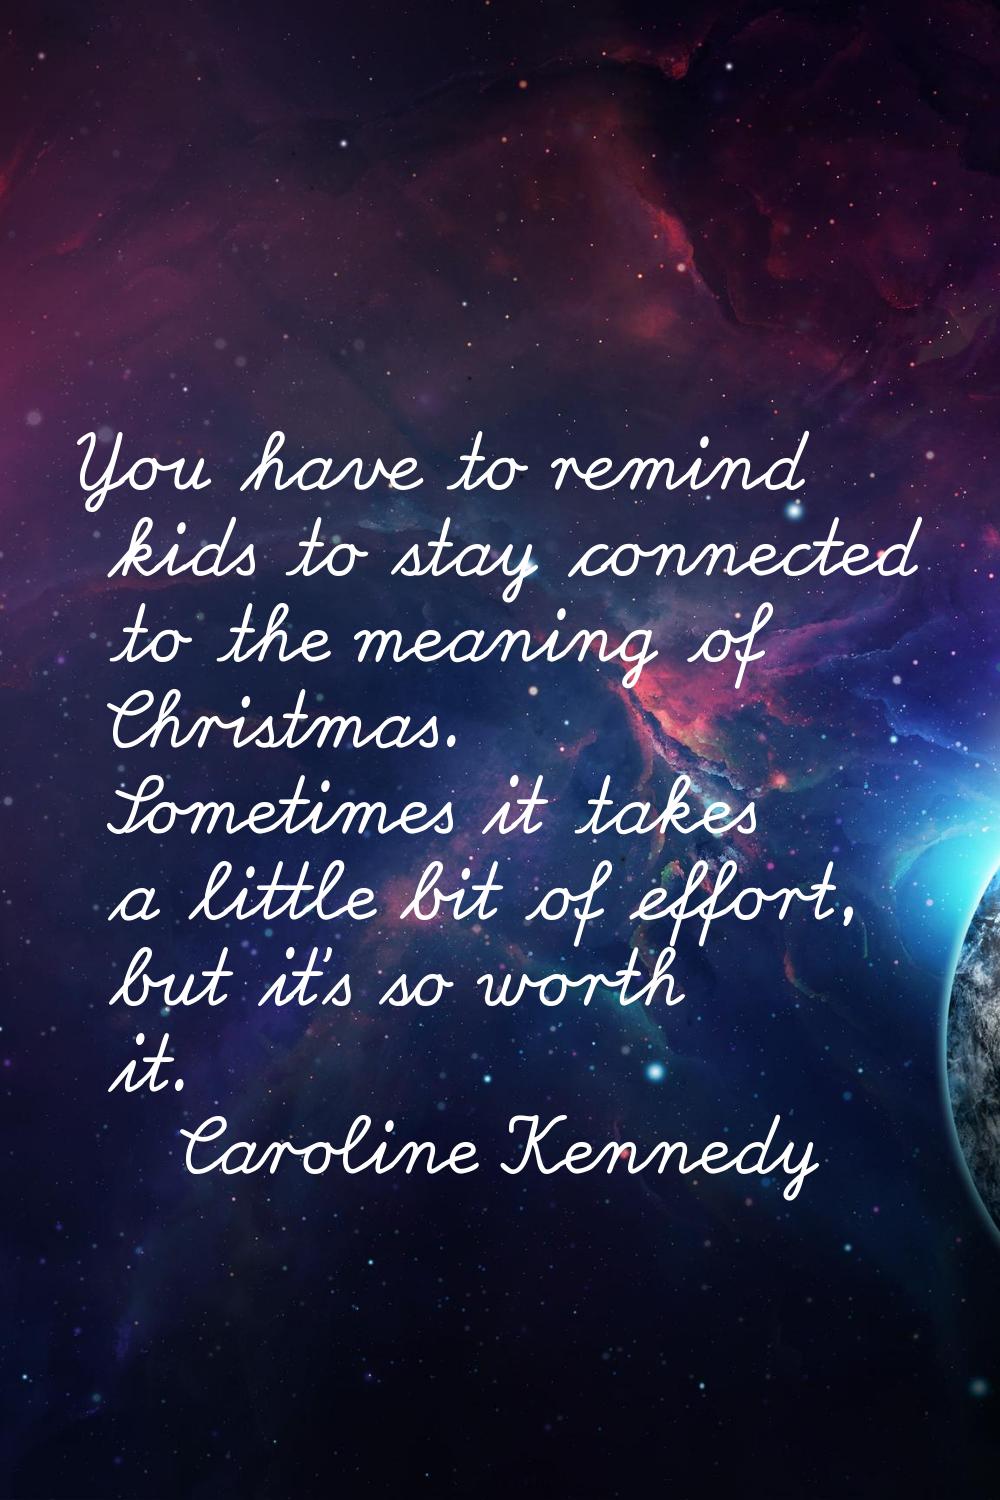 You have to remind kids to stay connected to the meaning of Christmas. Sometimes it takes a little 